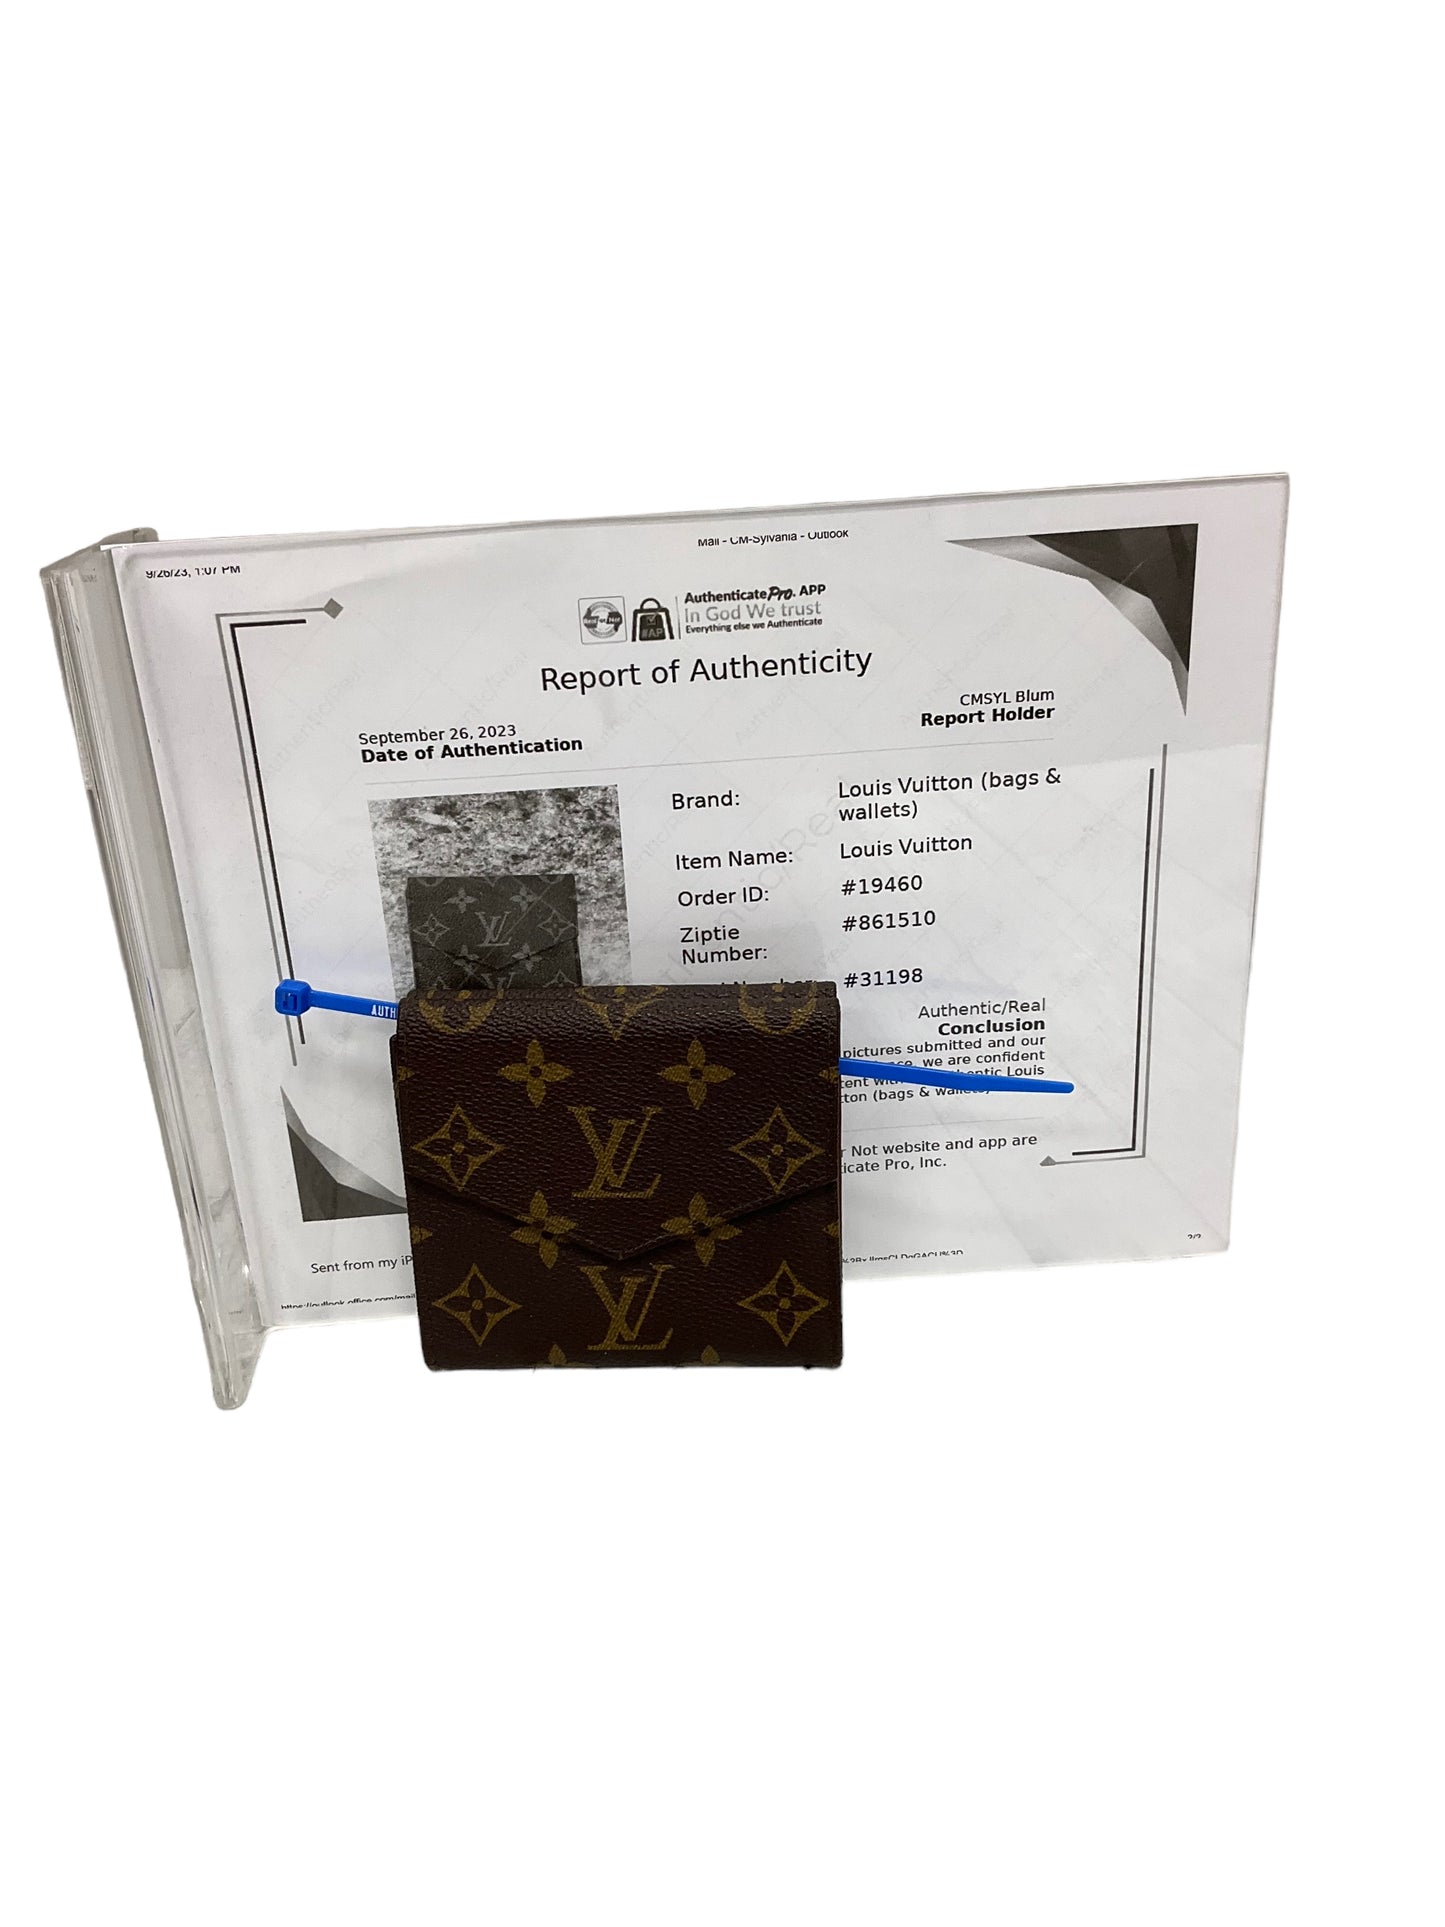 Wallet Designer By Louis Vuitton  Size: Small